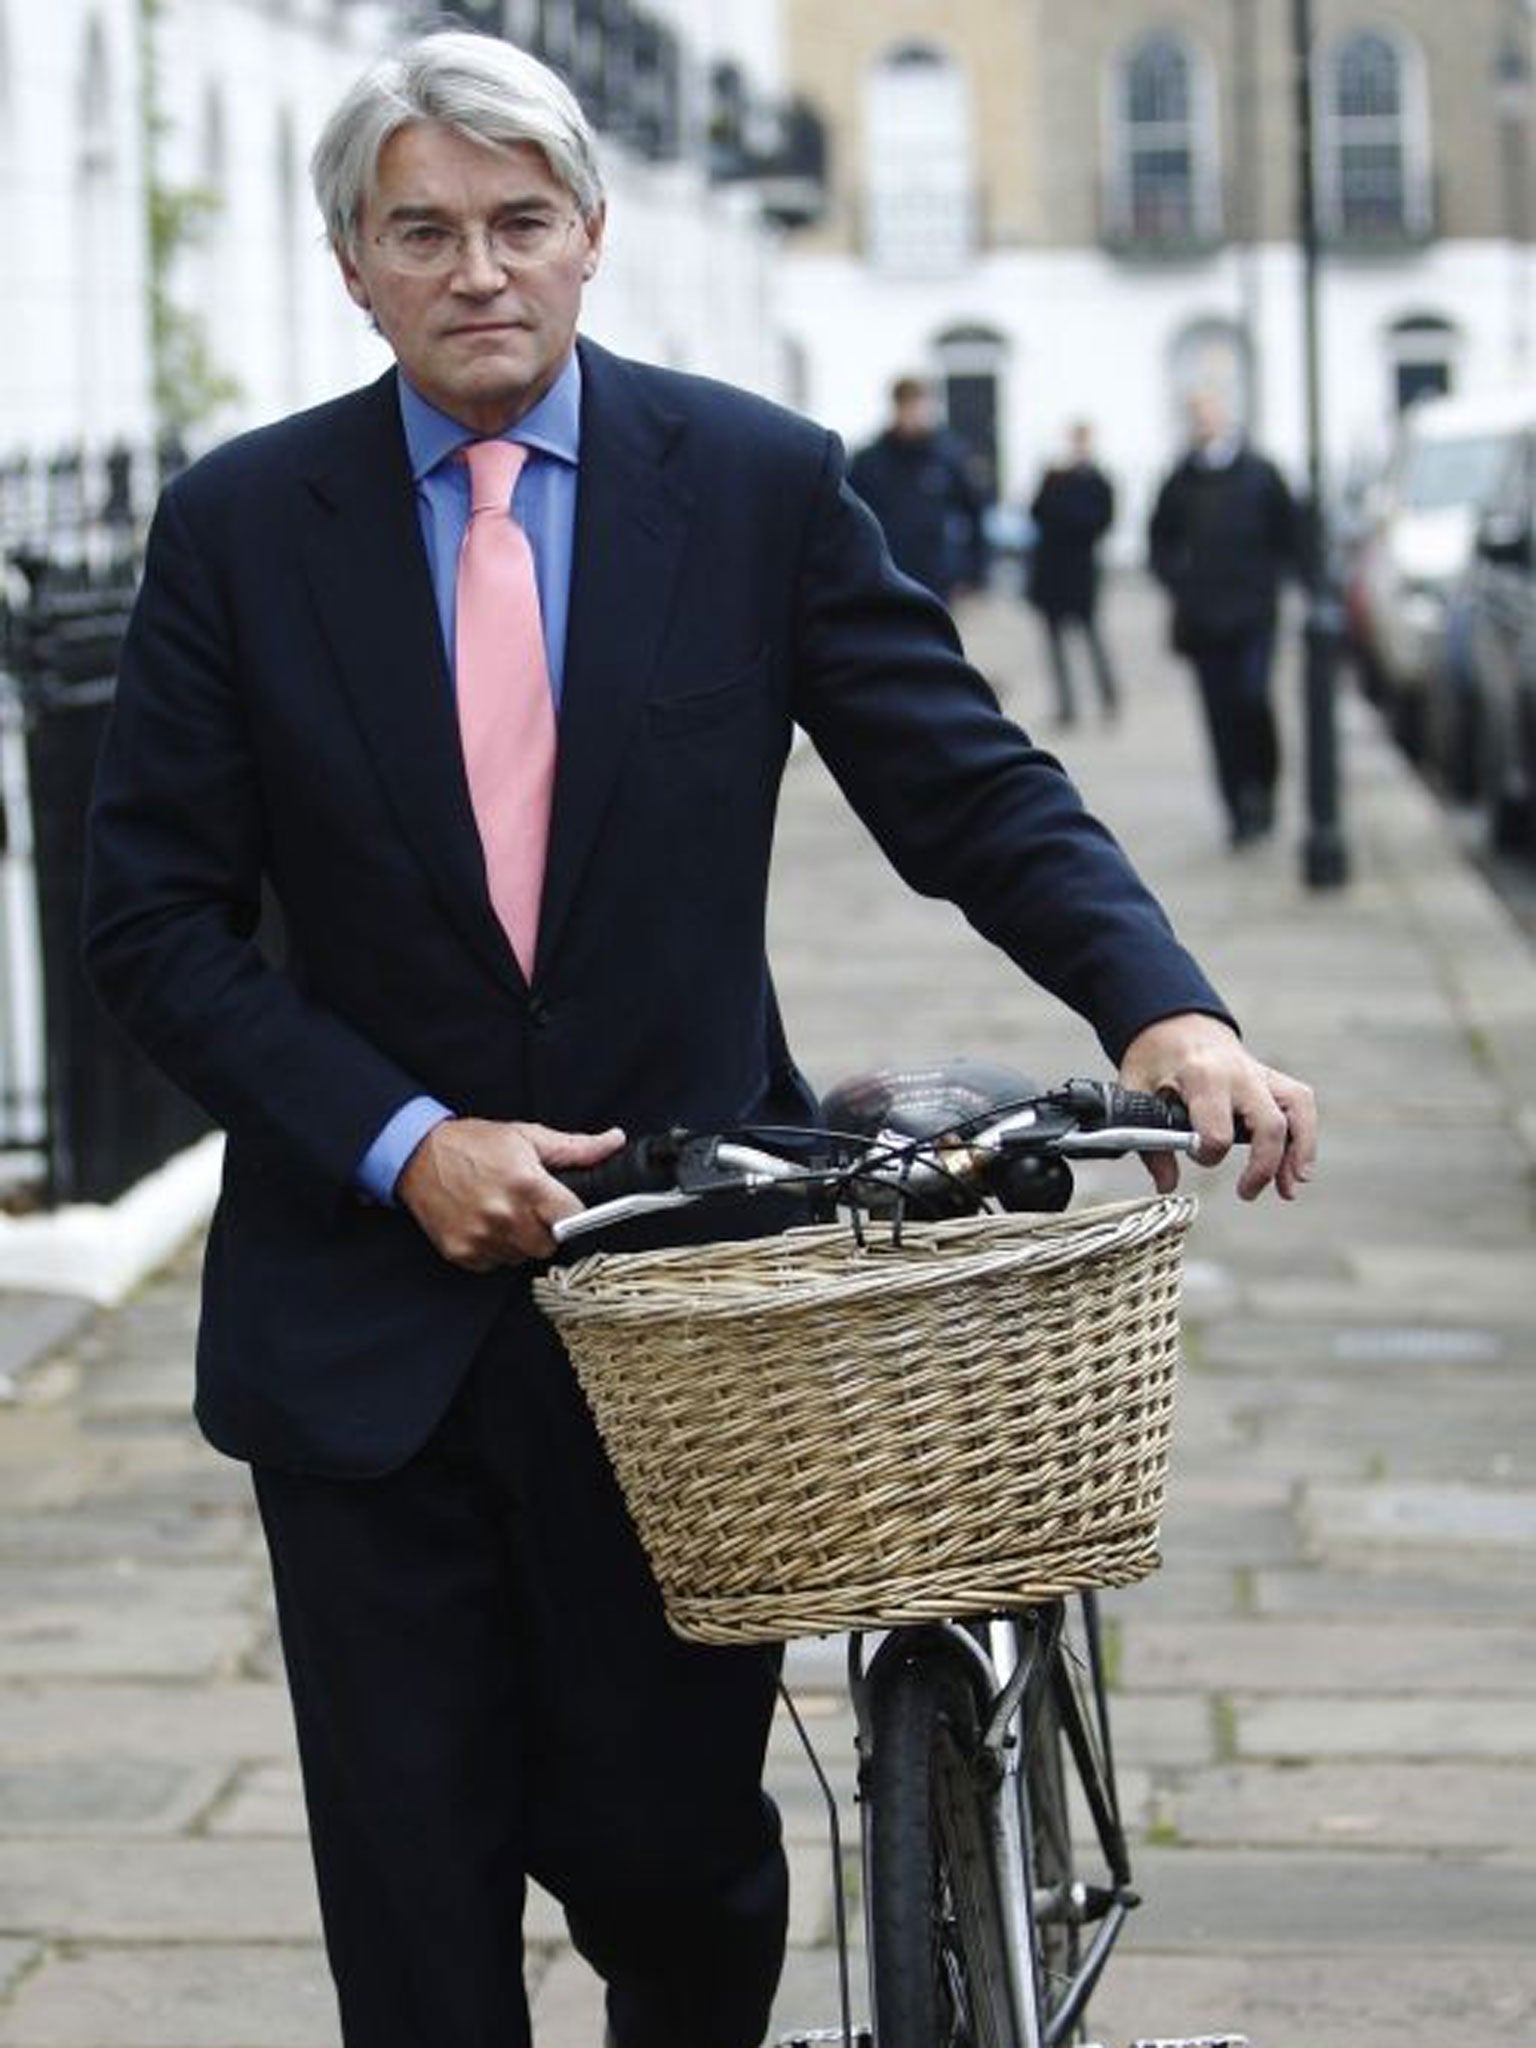 Andrew Mitchell MP during ‘Plebgate’